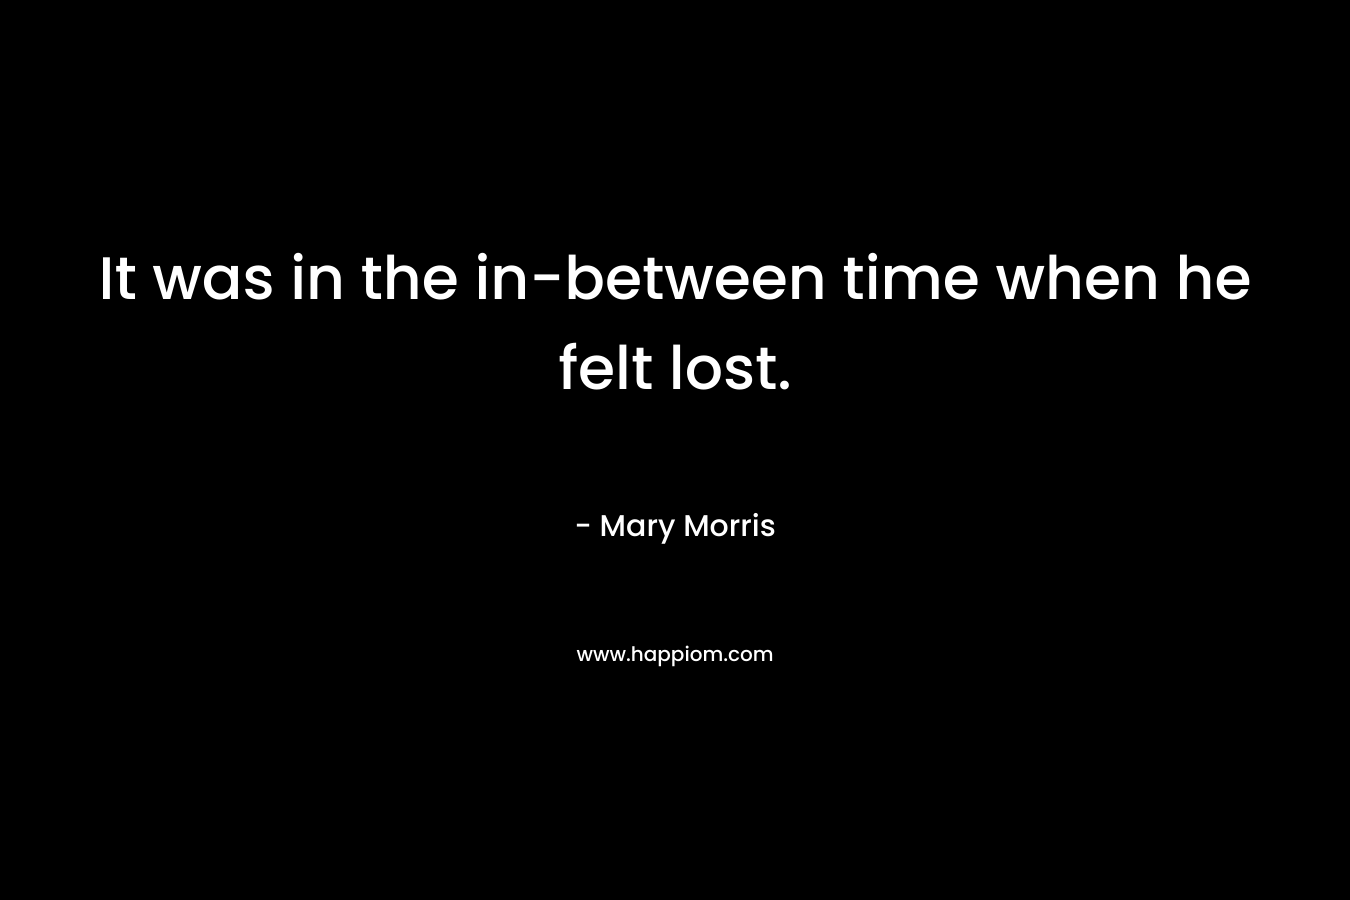 It was in the in-between time when he felt lost. – Mary Morris